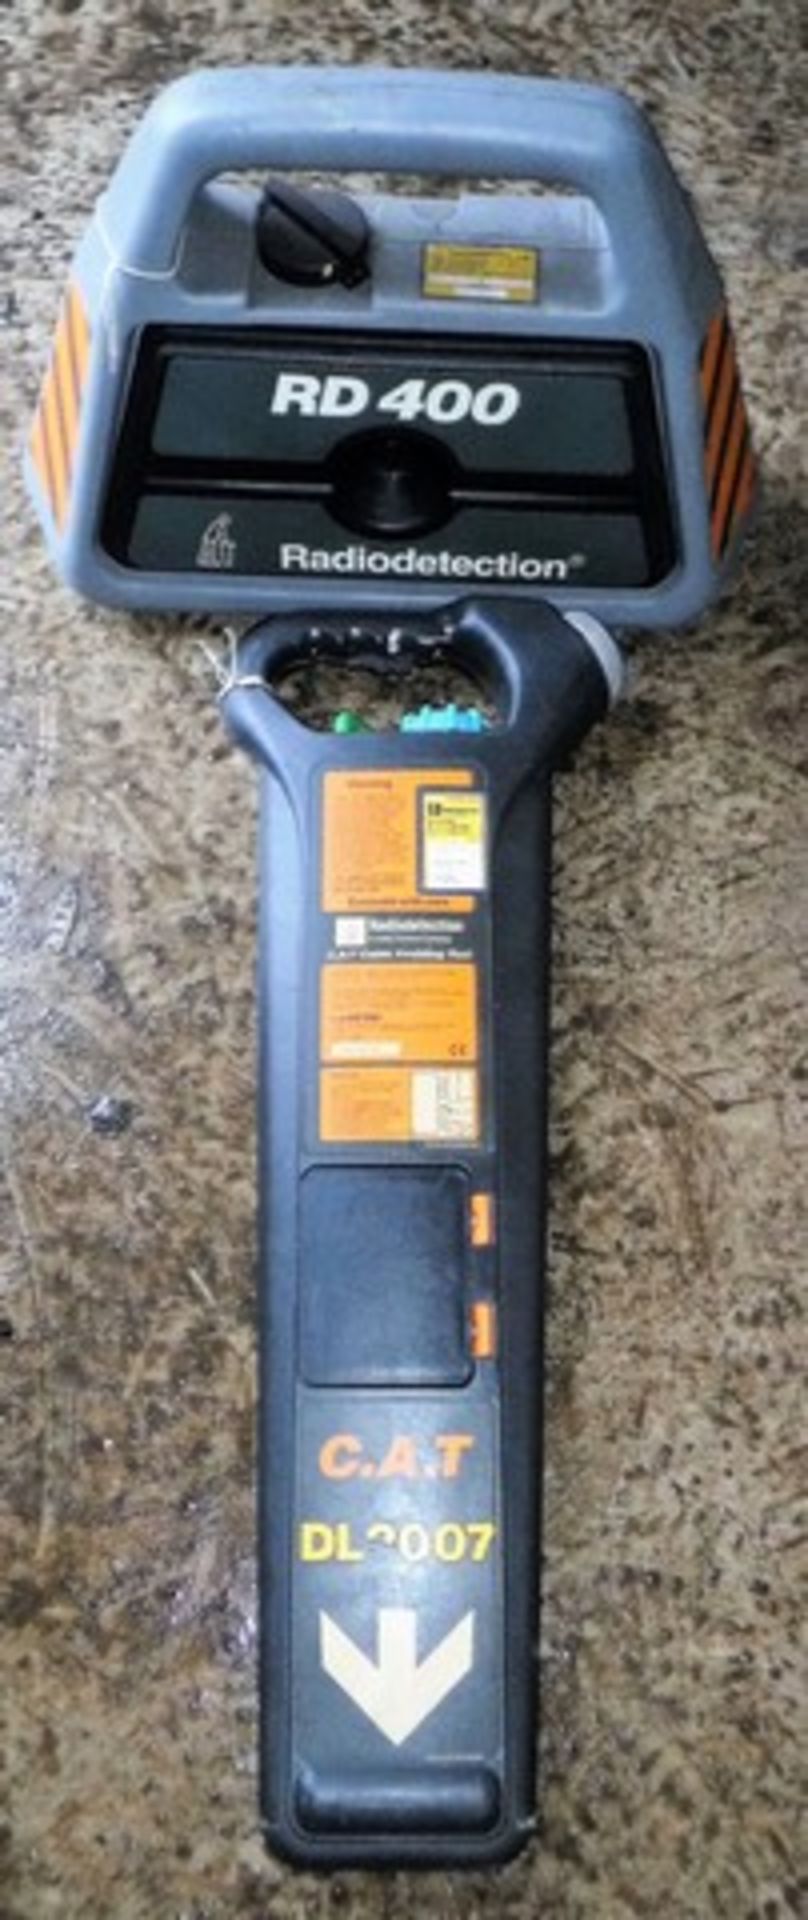 CAT RADIO DETECTION SCANNER WITH GENERATOR, ASSET NO DL2007 & RD400